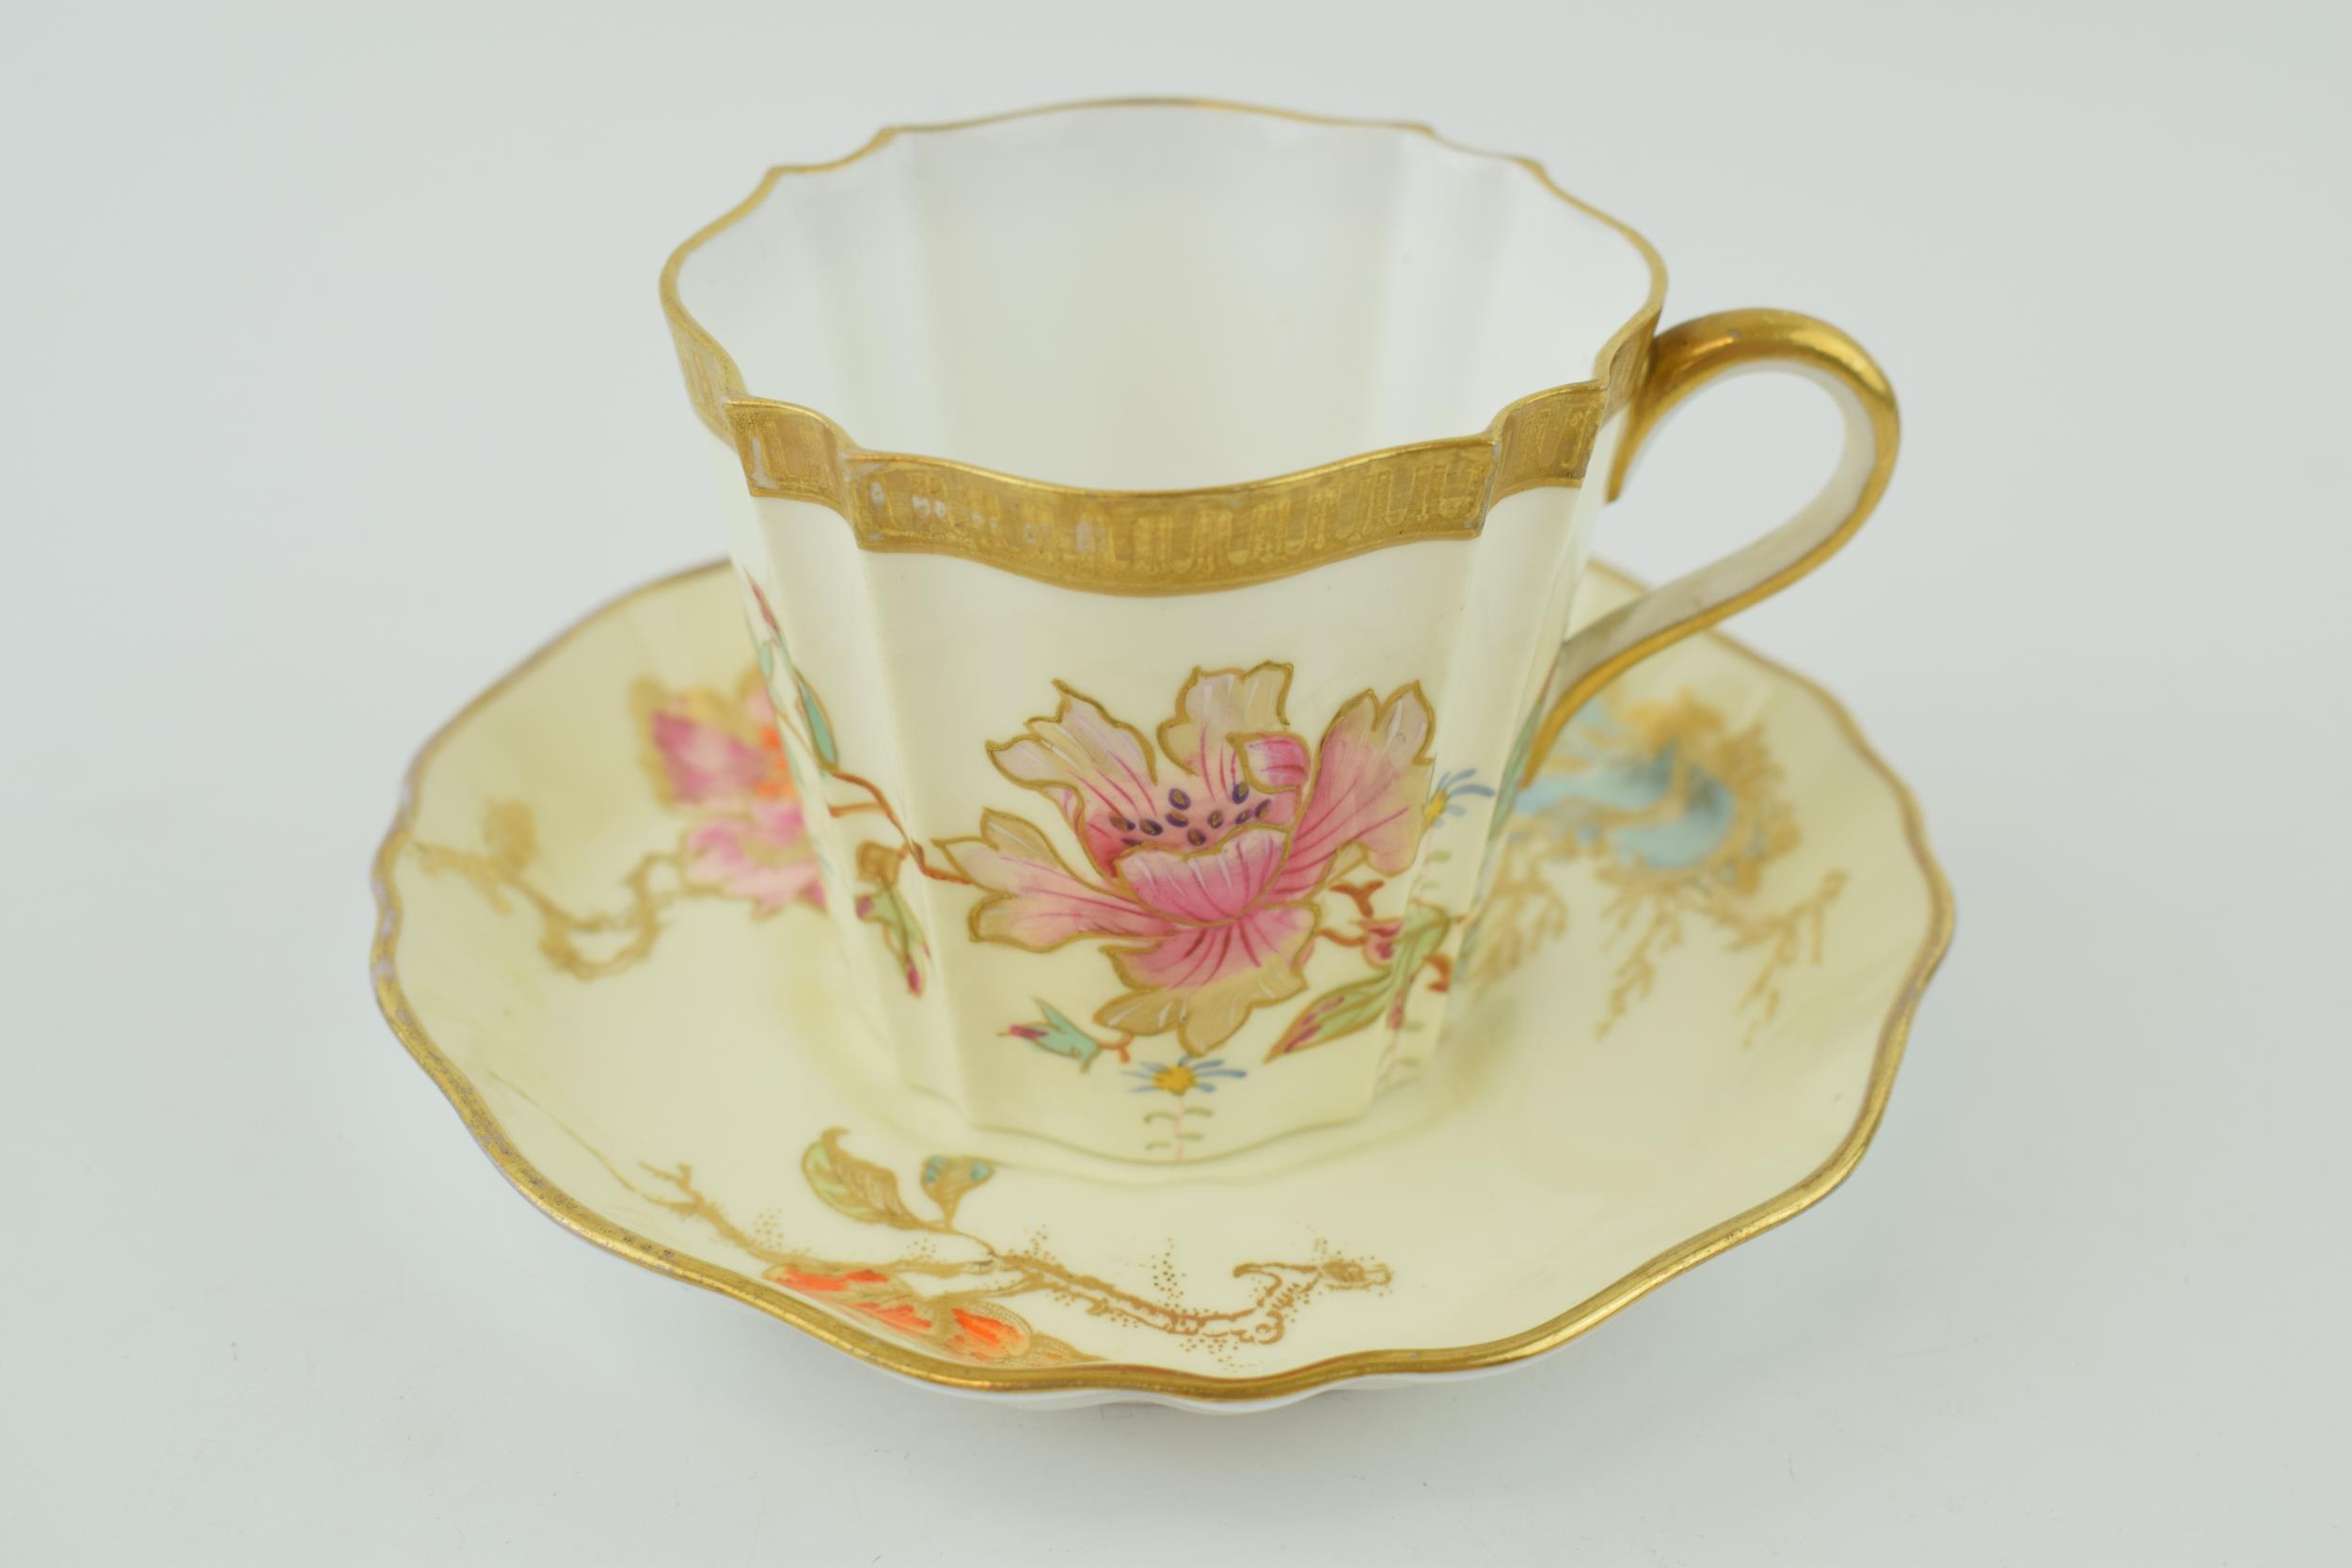 Wedgwood floral cup and saucer (2). In good condition with no obvious damage or restoration.